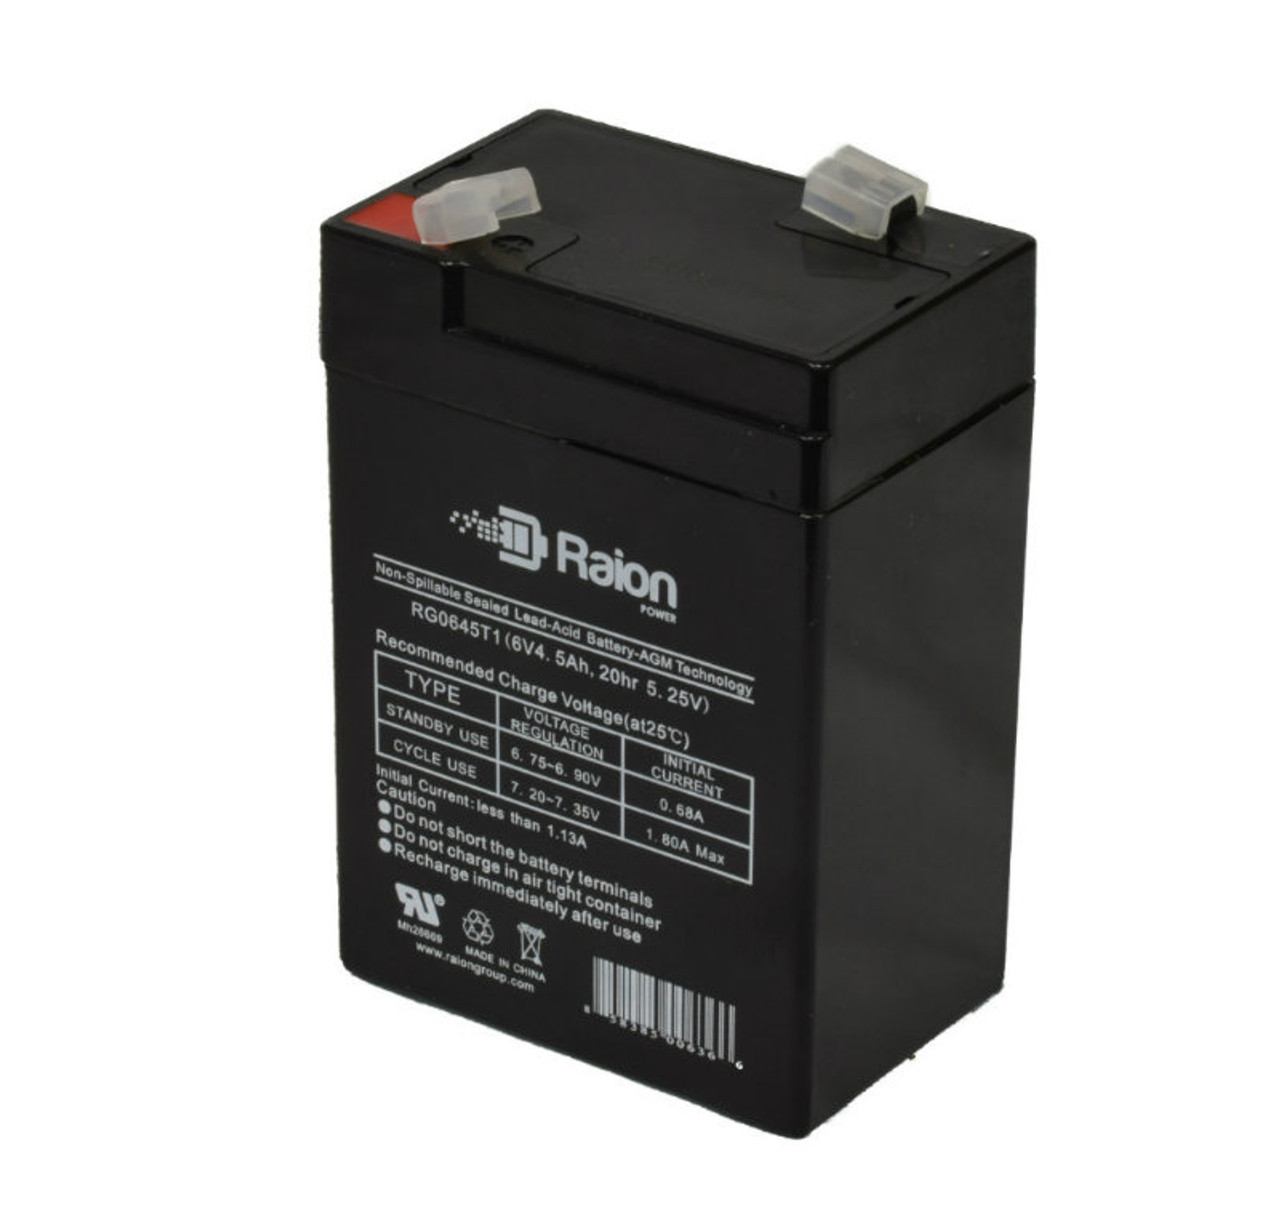 Raion Power RG0645T1 6V 4.5Ah Replacement Battery Cartridge for Peg Perego IGED1080 6V Santa Fe Express